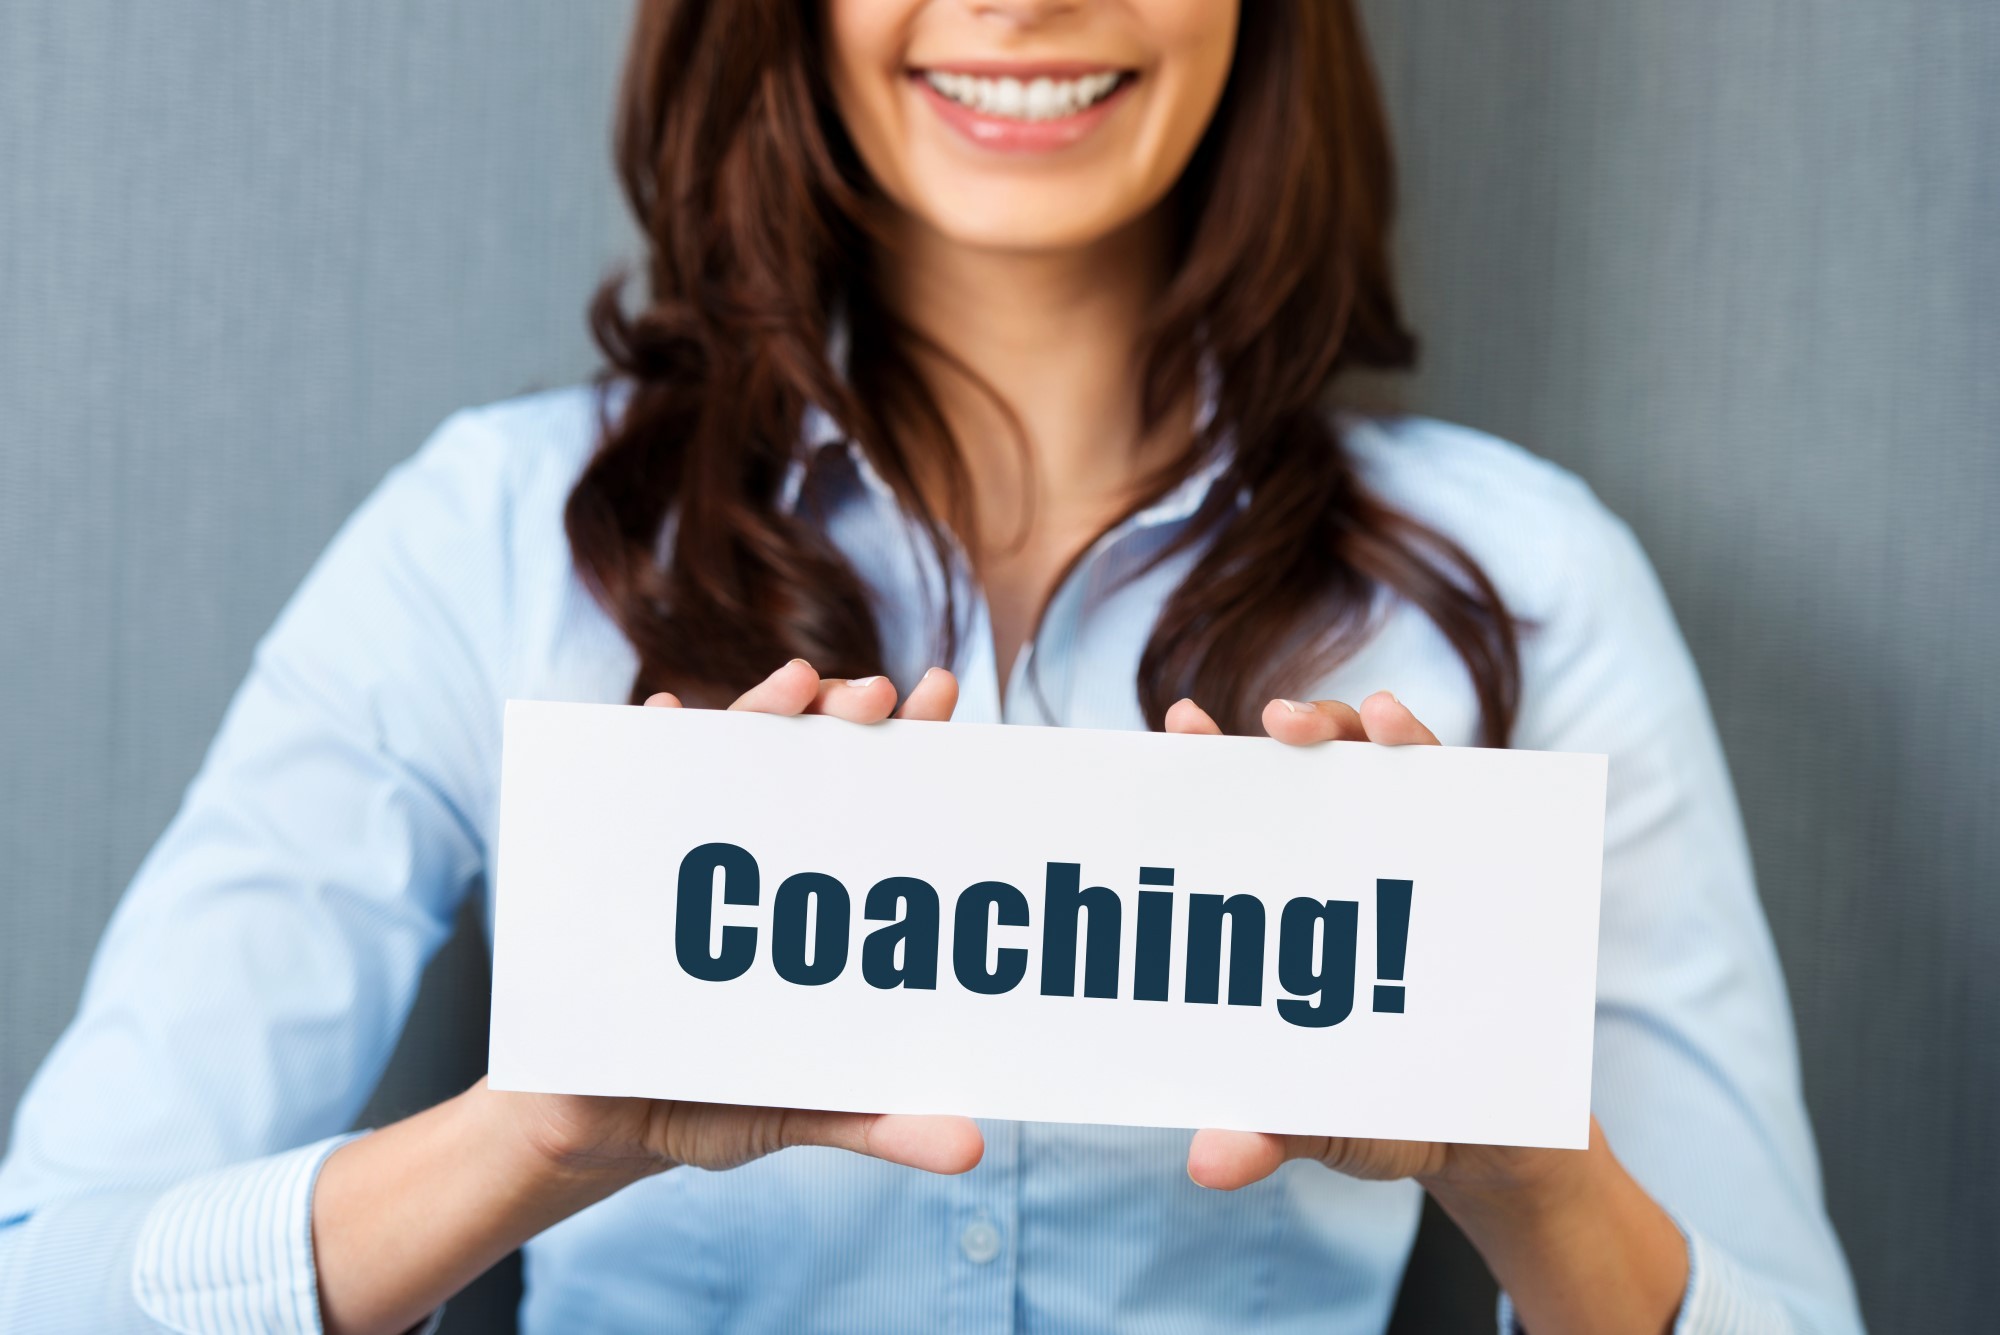 Coaching: Features and Benefits